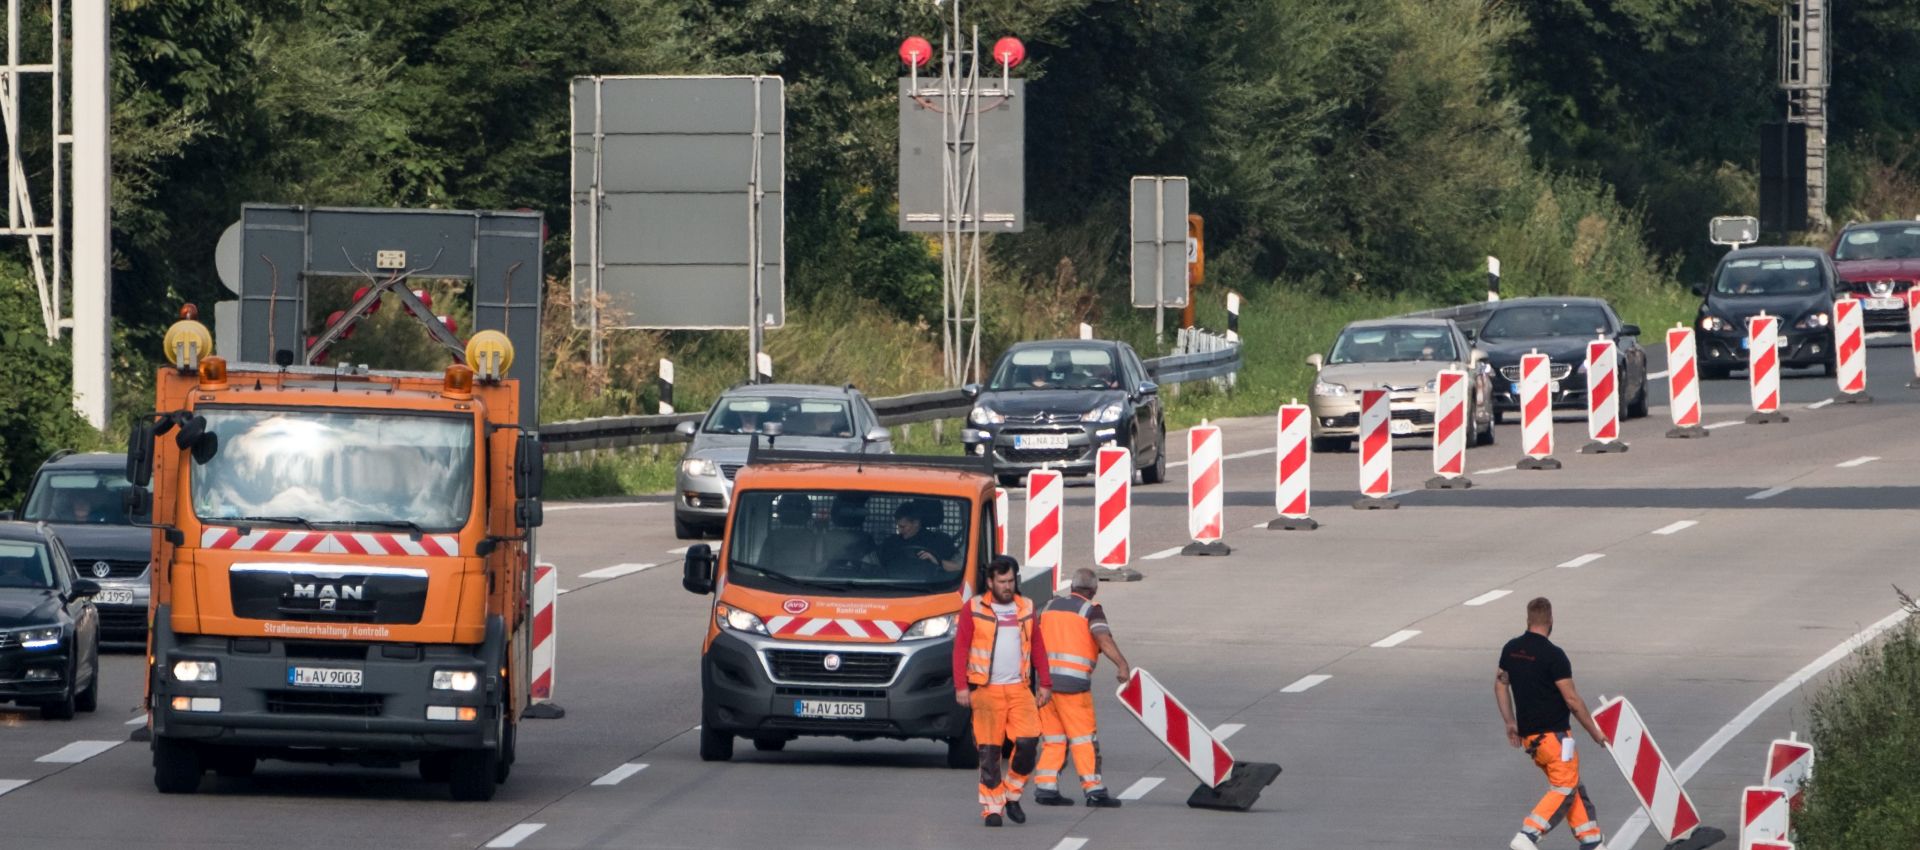 epa05483077 Traffic on the A2 motorway is detoured due to a possible bomb defusing, in Hanover, Germany, 14 August 2016. Suspected bombs from WWII have led to the closure of the motorway A2 in Hanover. Around 7,500 nearby residents had to leave their homes, after maintenance works on the motorway have revealed possible unexploded bombs. If the suspicion is confirmed, bomb squad is expected to defuse the explosives by midday.  EPA/PETER STEFFEN